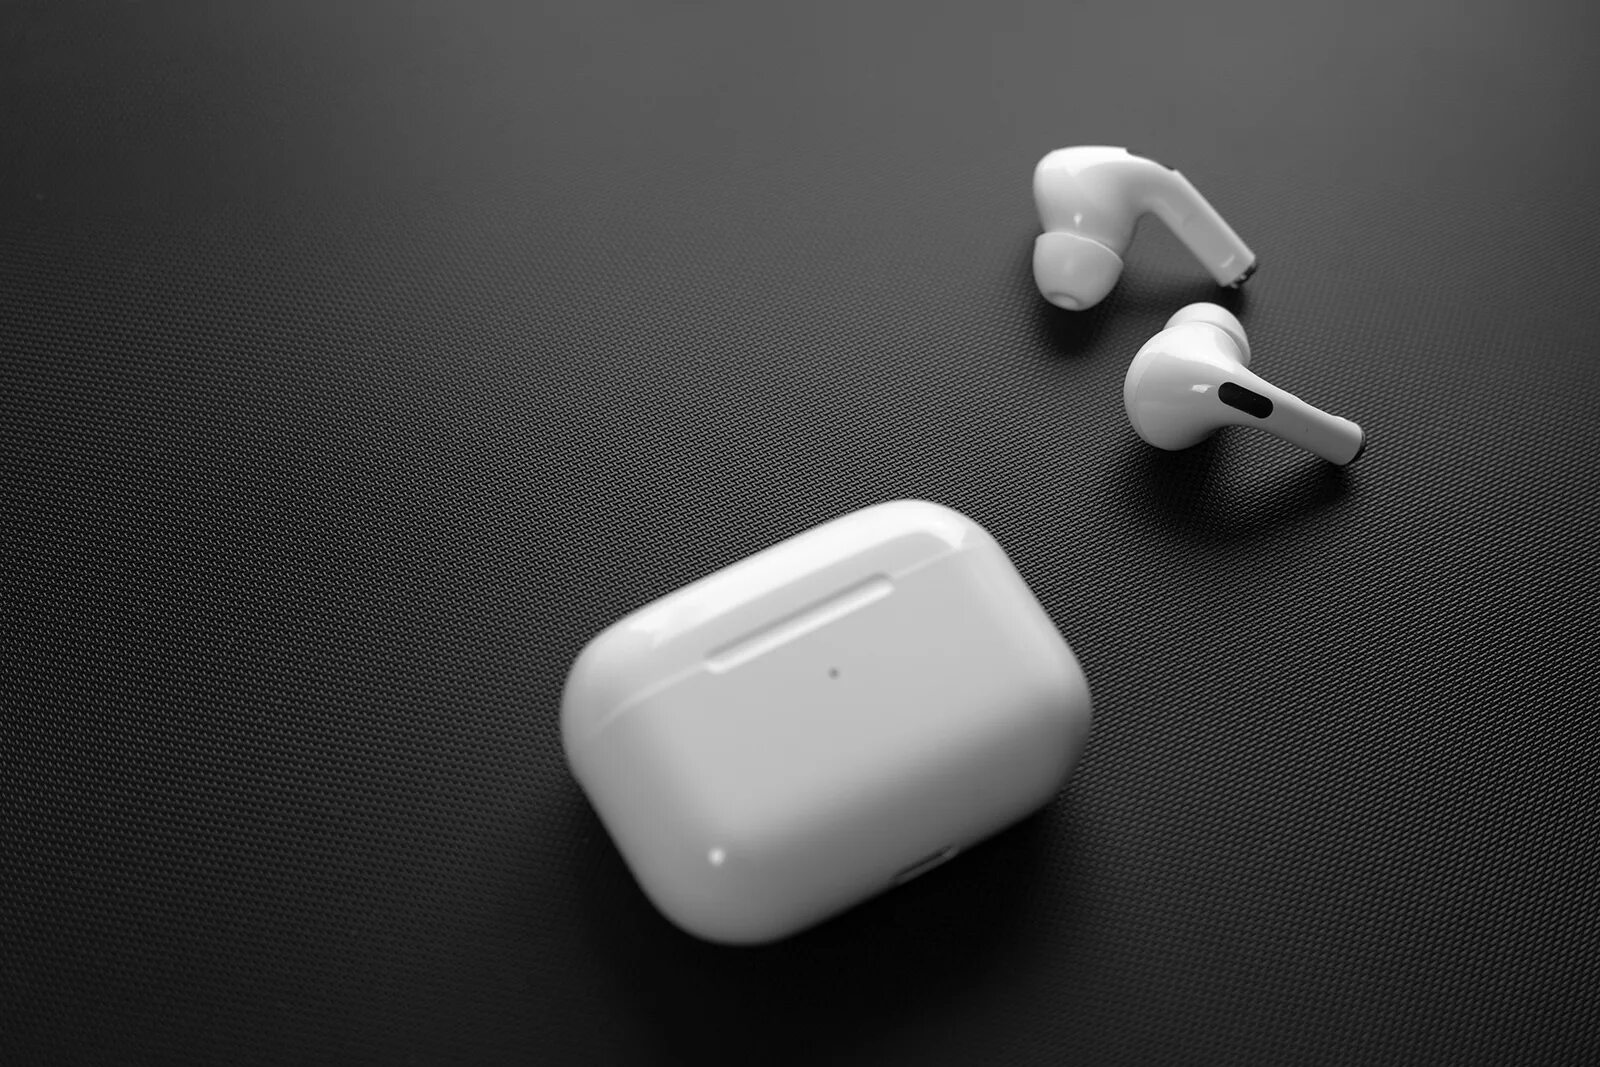 A2564 airpods. Apple AIRPODS 2. Наушники Apple аирподс про 2. Apple AIRPODS 4. Apple AIRPODS 2.2.